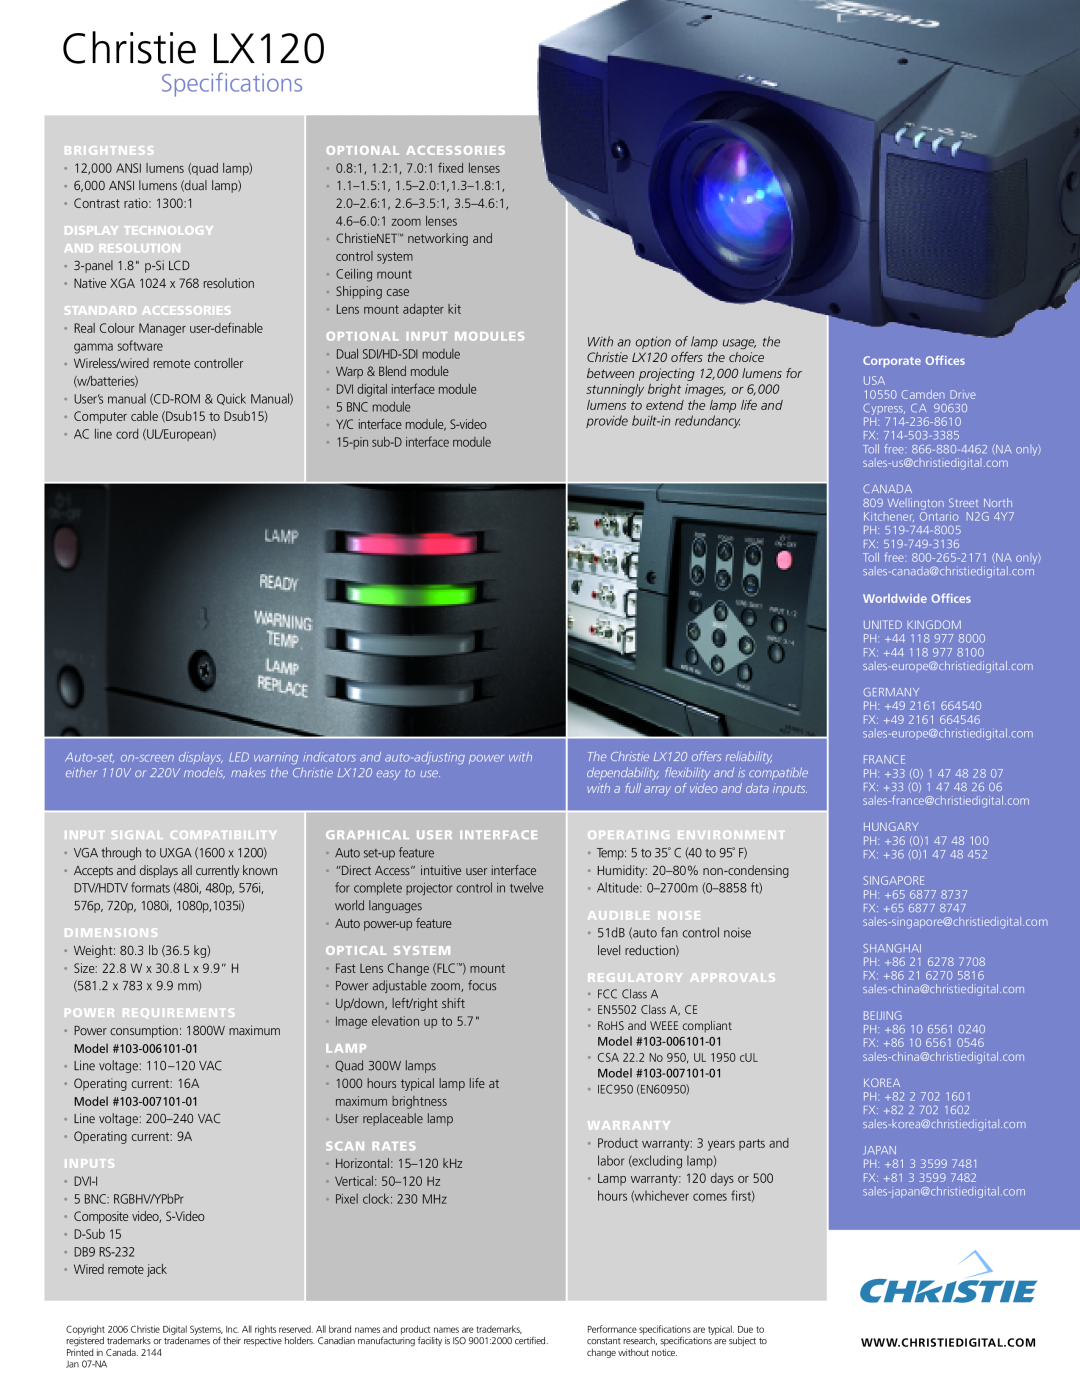 Christie Digital Systems manual Specifications, The Christie LX120 offers reliability 